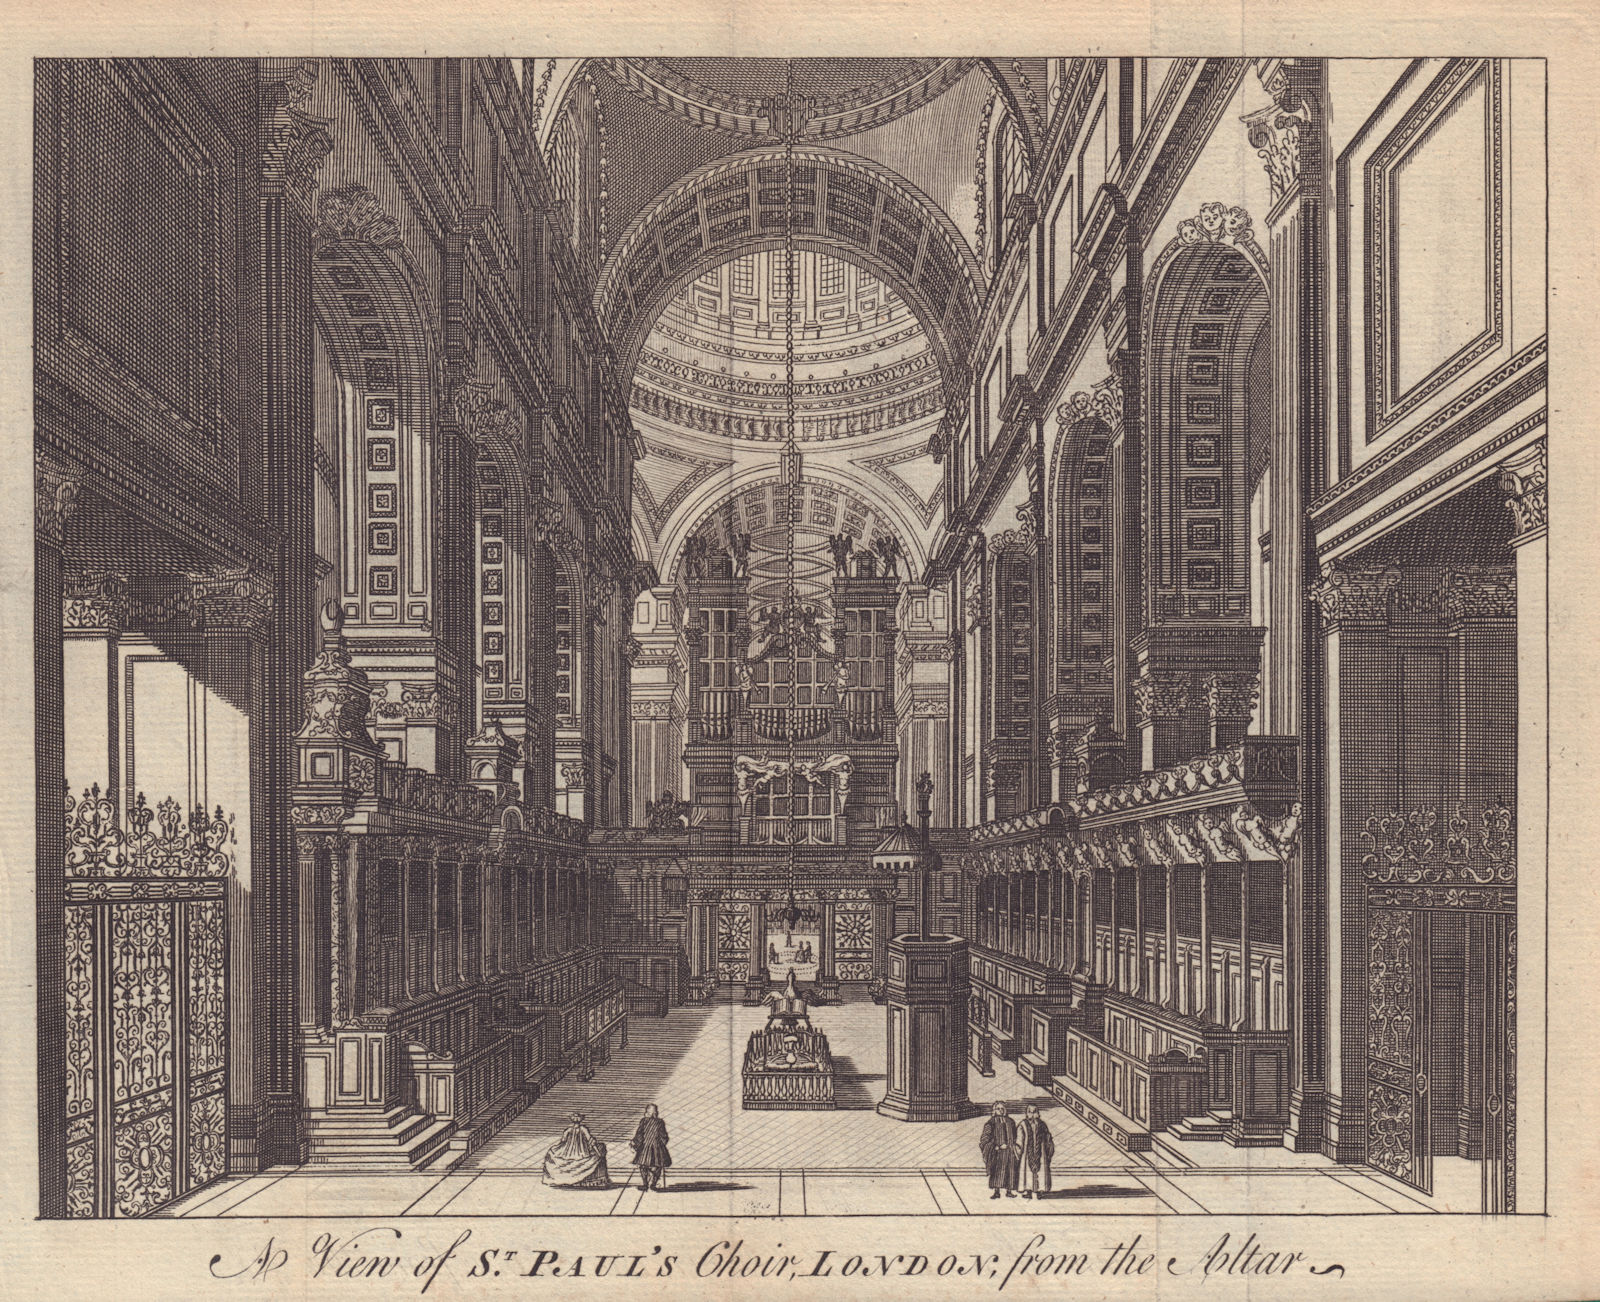 A View of St. Paul's Choir [Cathedral], London, from the Altar. Cathedral 1750